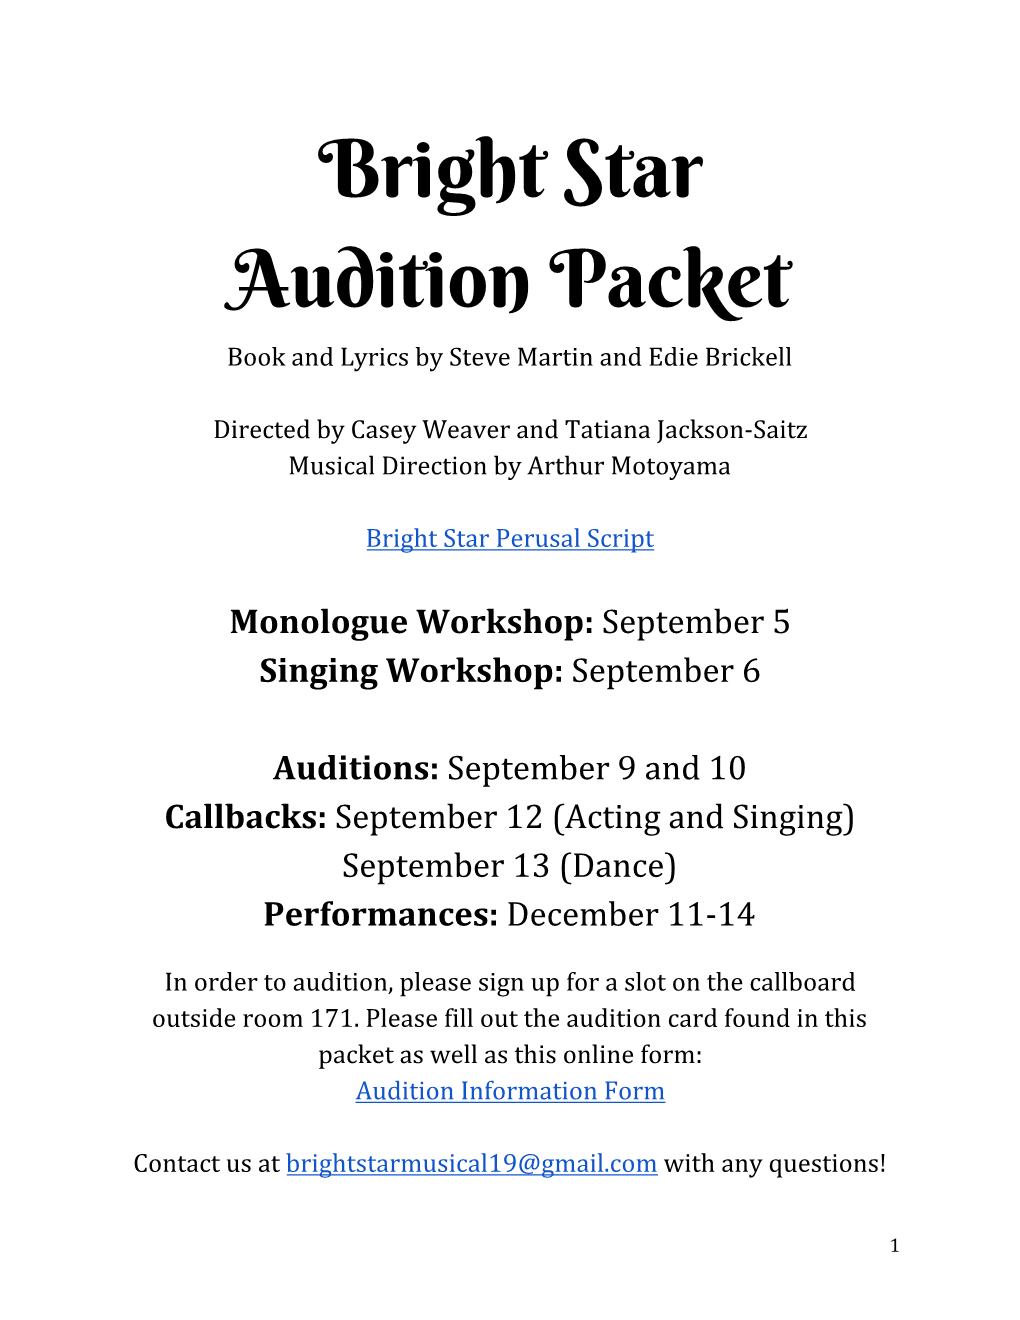 Bright Star Audition Packet